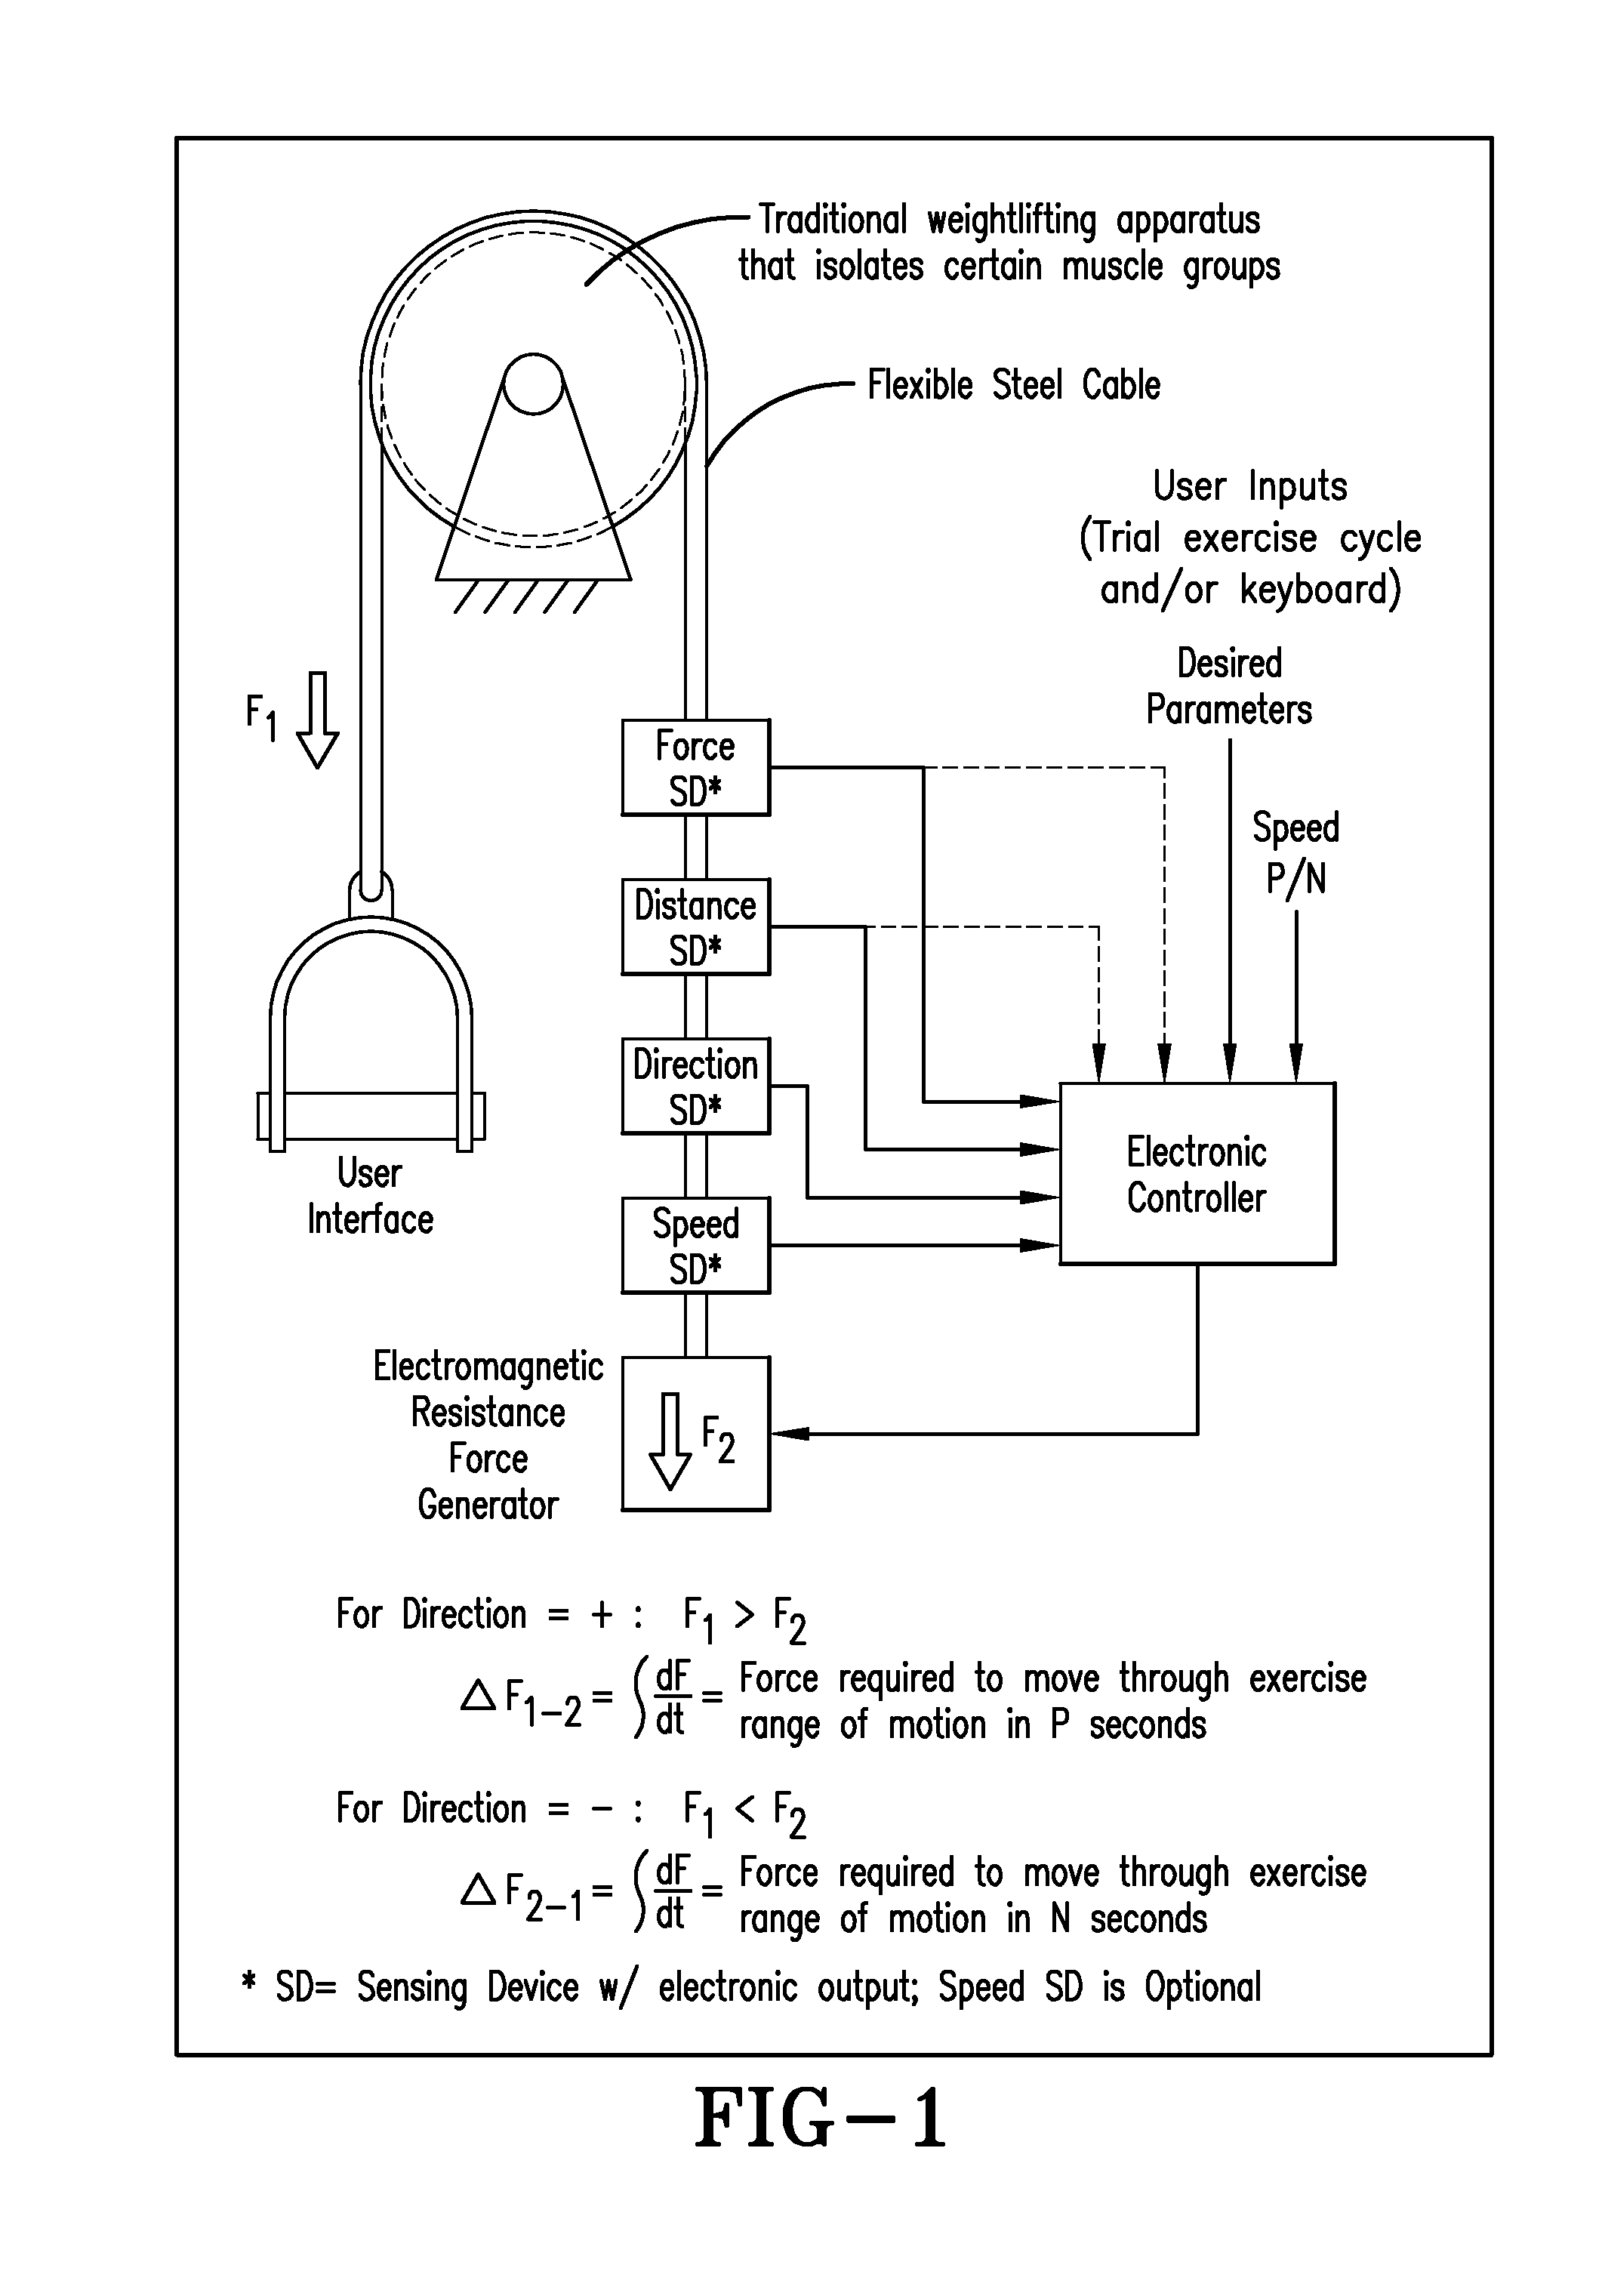 Continuously variable resistance exercise system